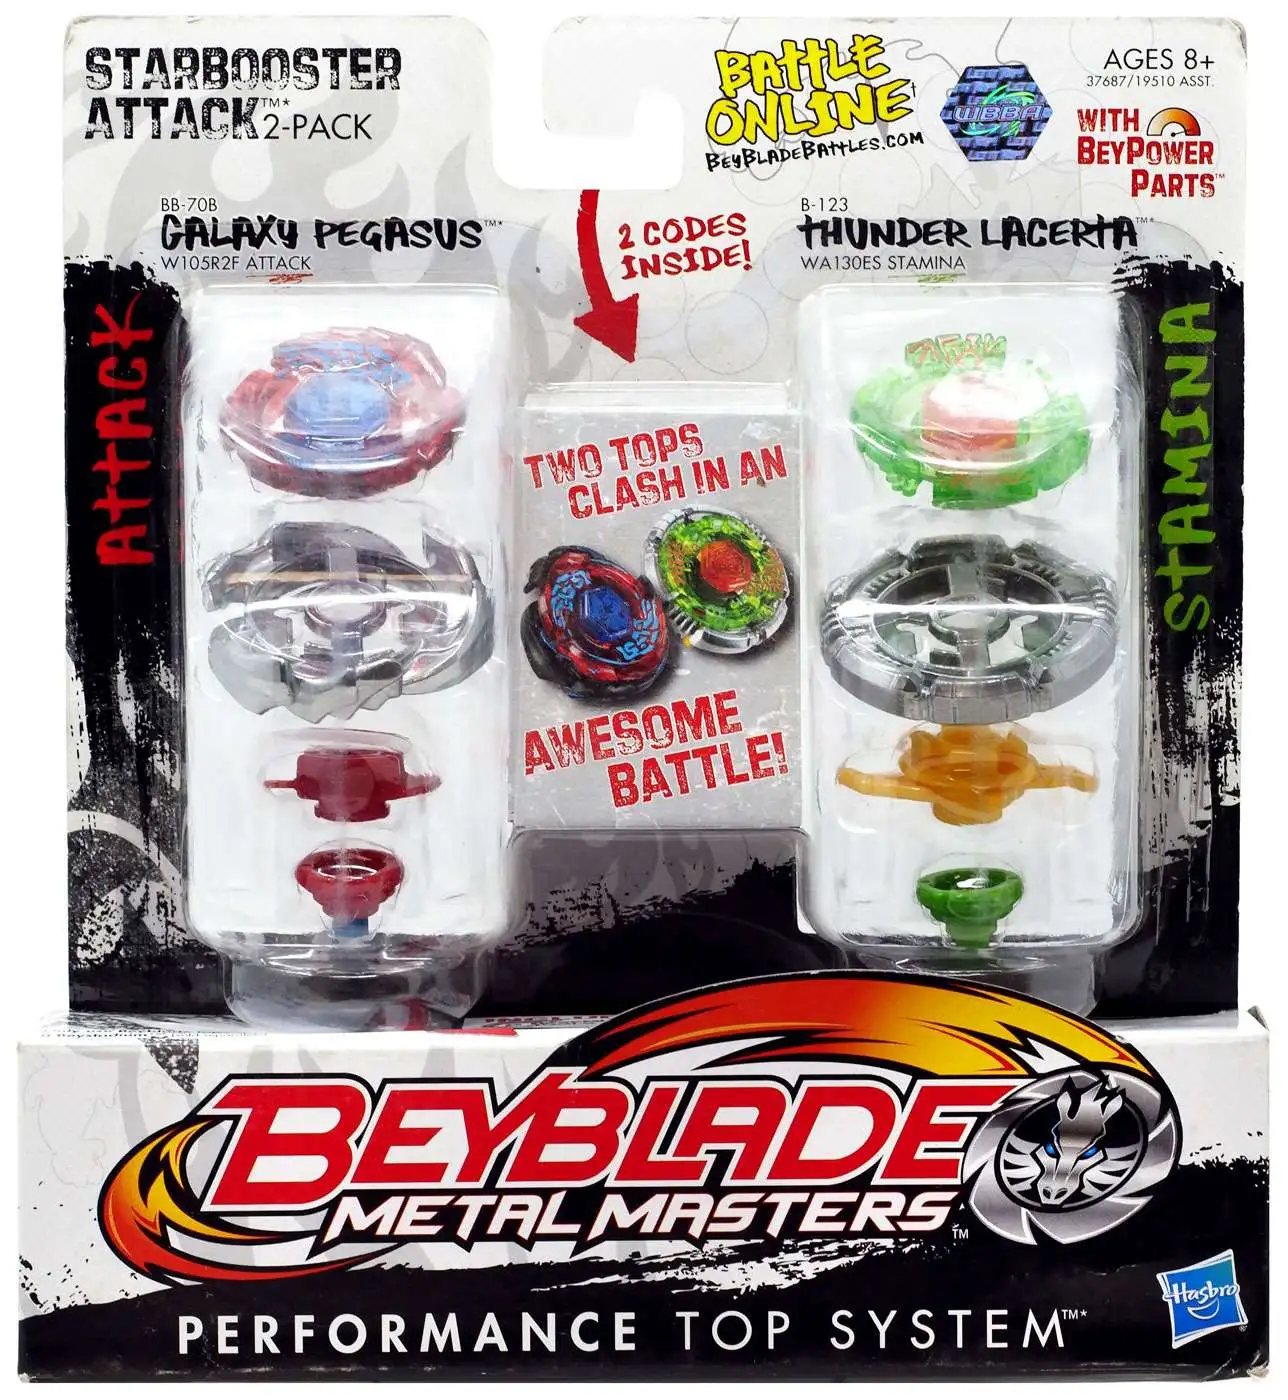 Beyblade Metal Masters Starbooster Attack 2-Pack BB70B Hasbro Toys -